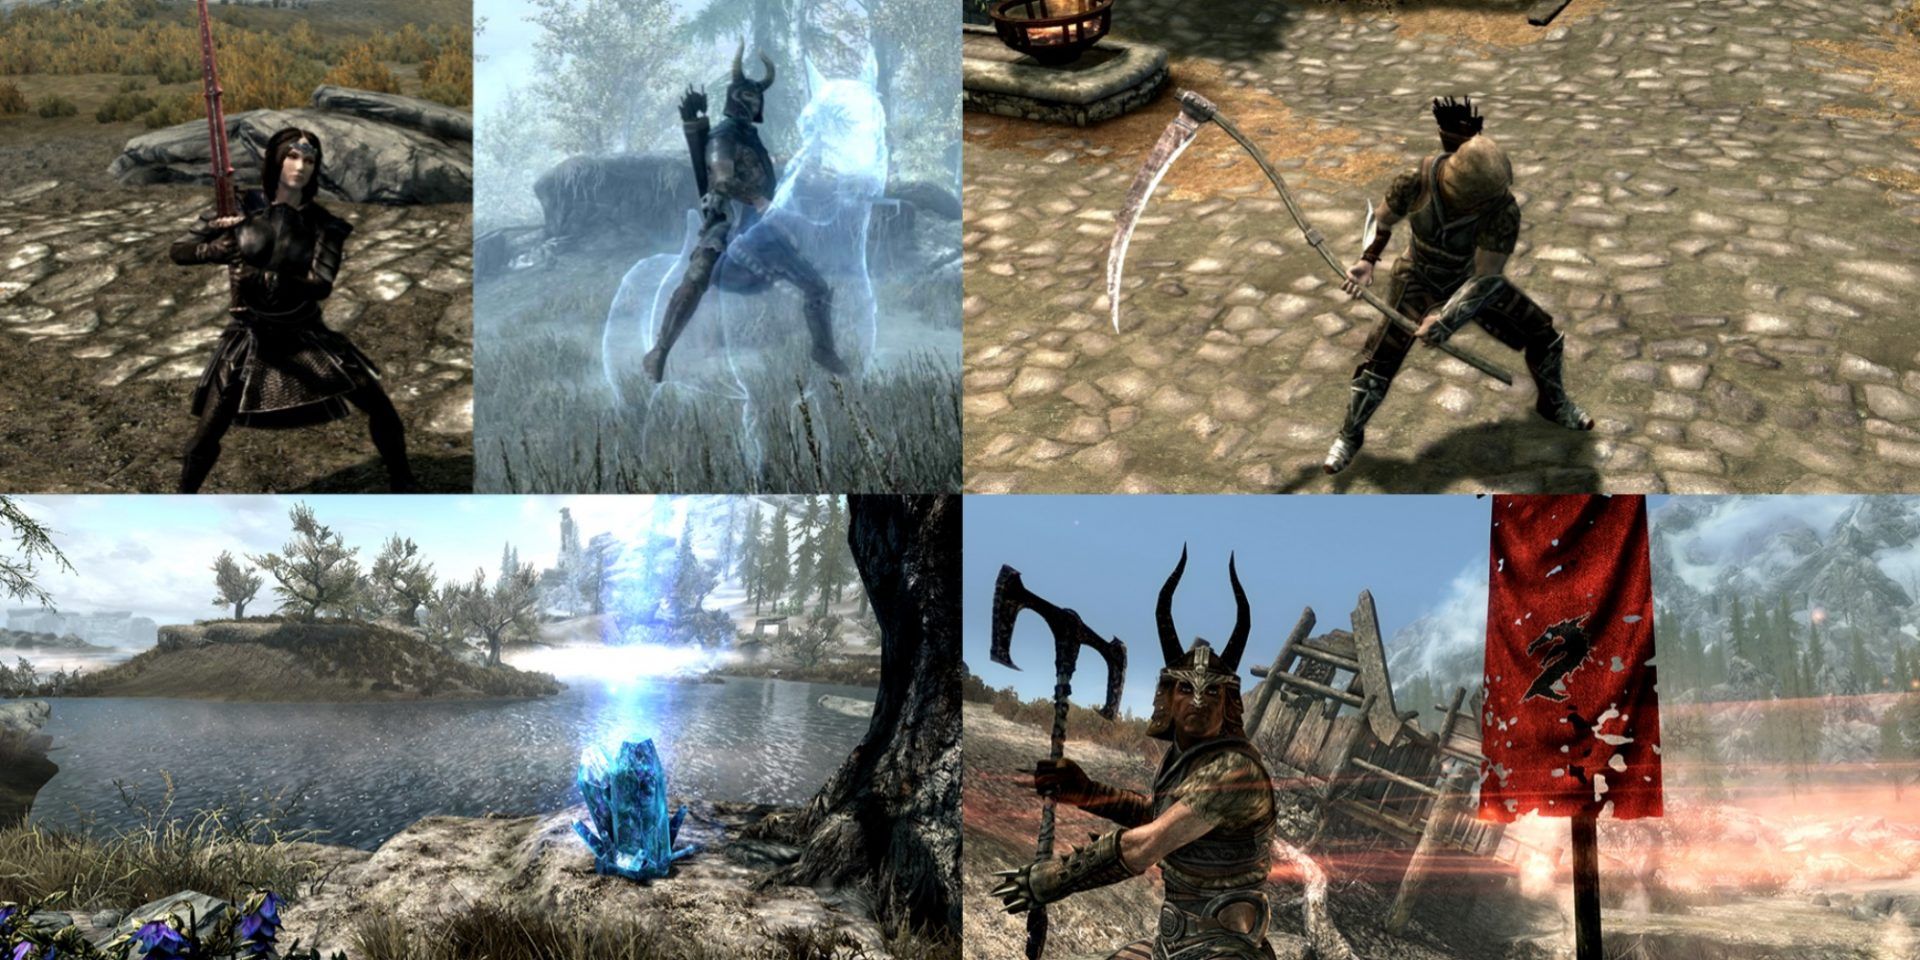 Various Mods in Skyrim from graphics to weapons enhancements